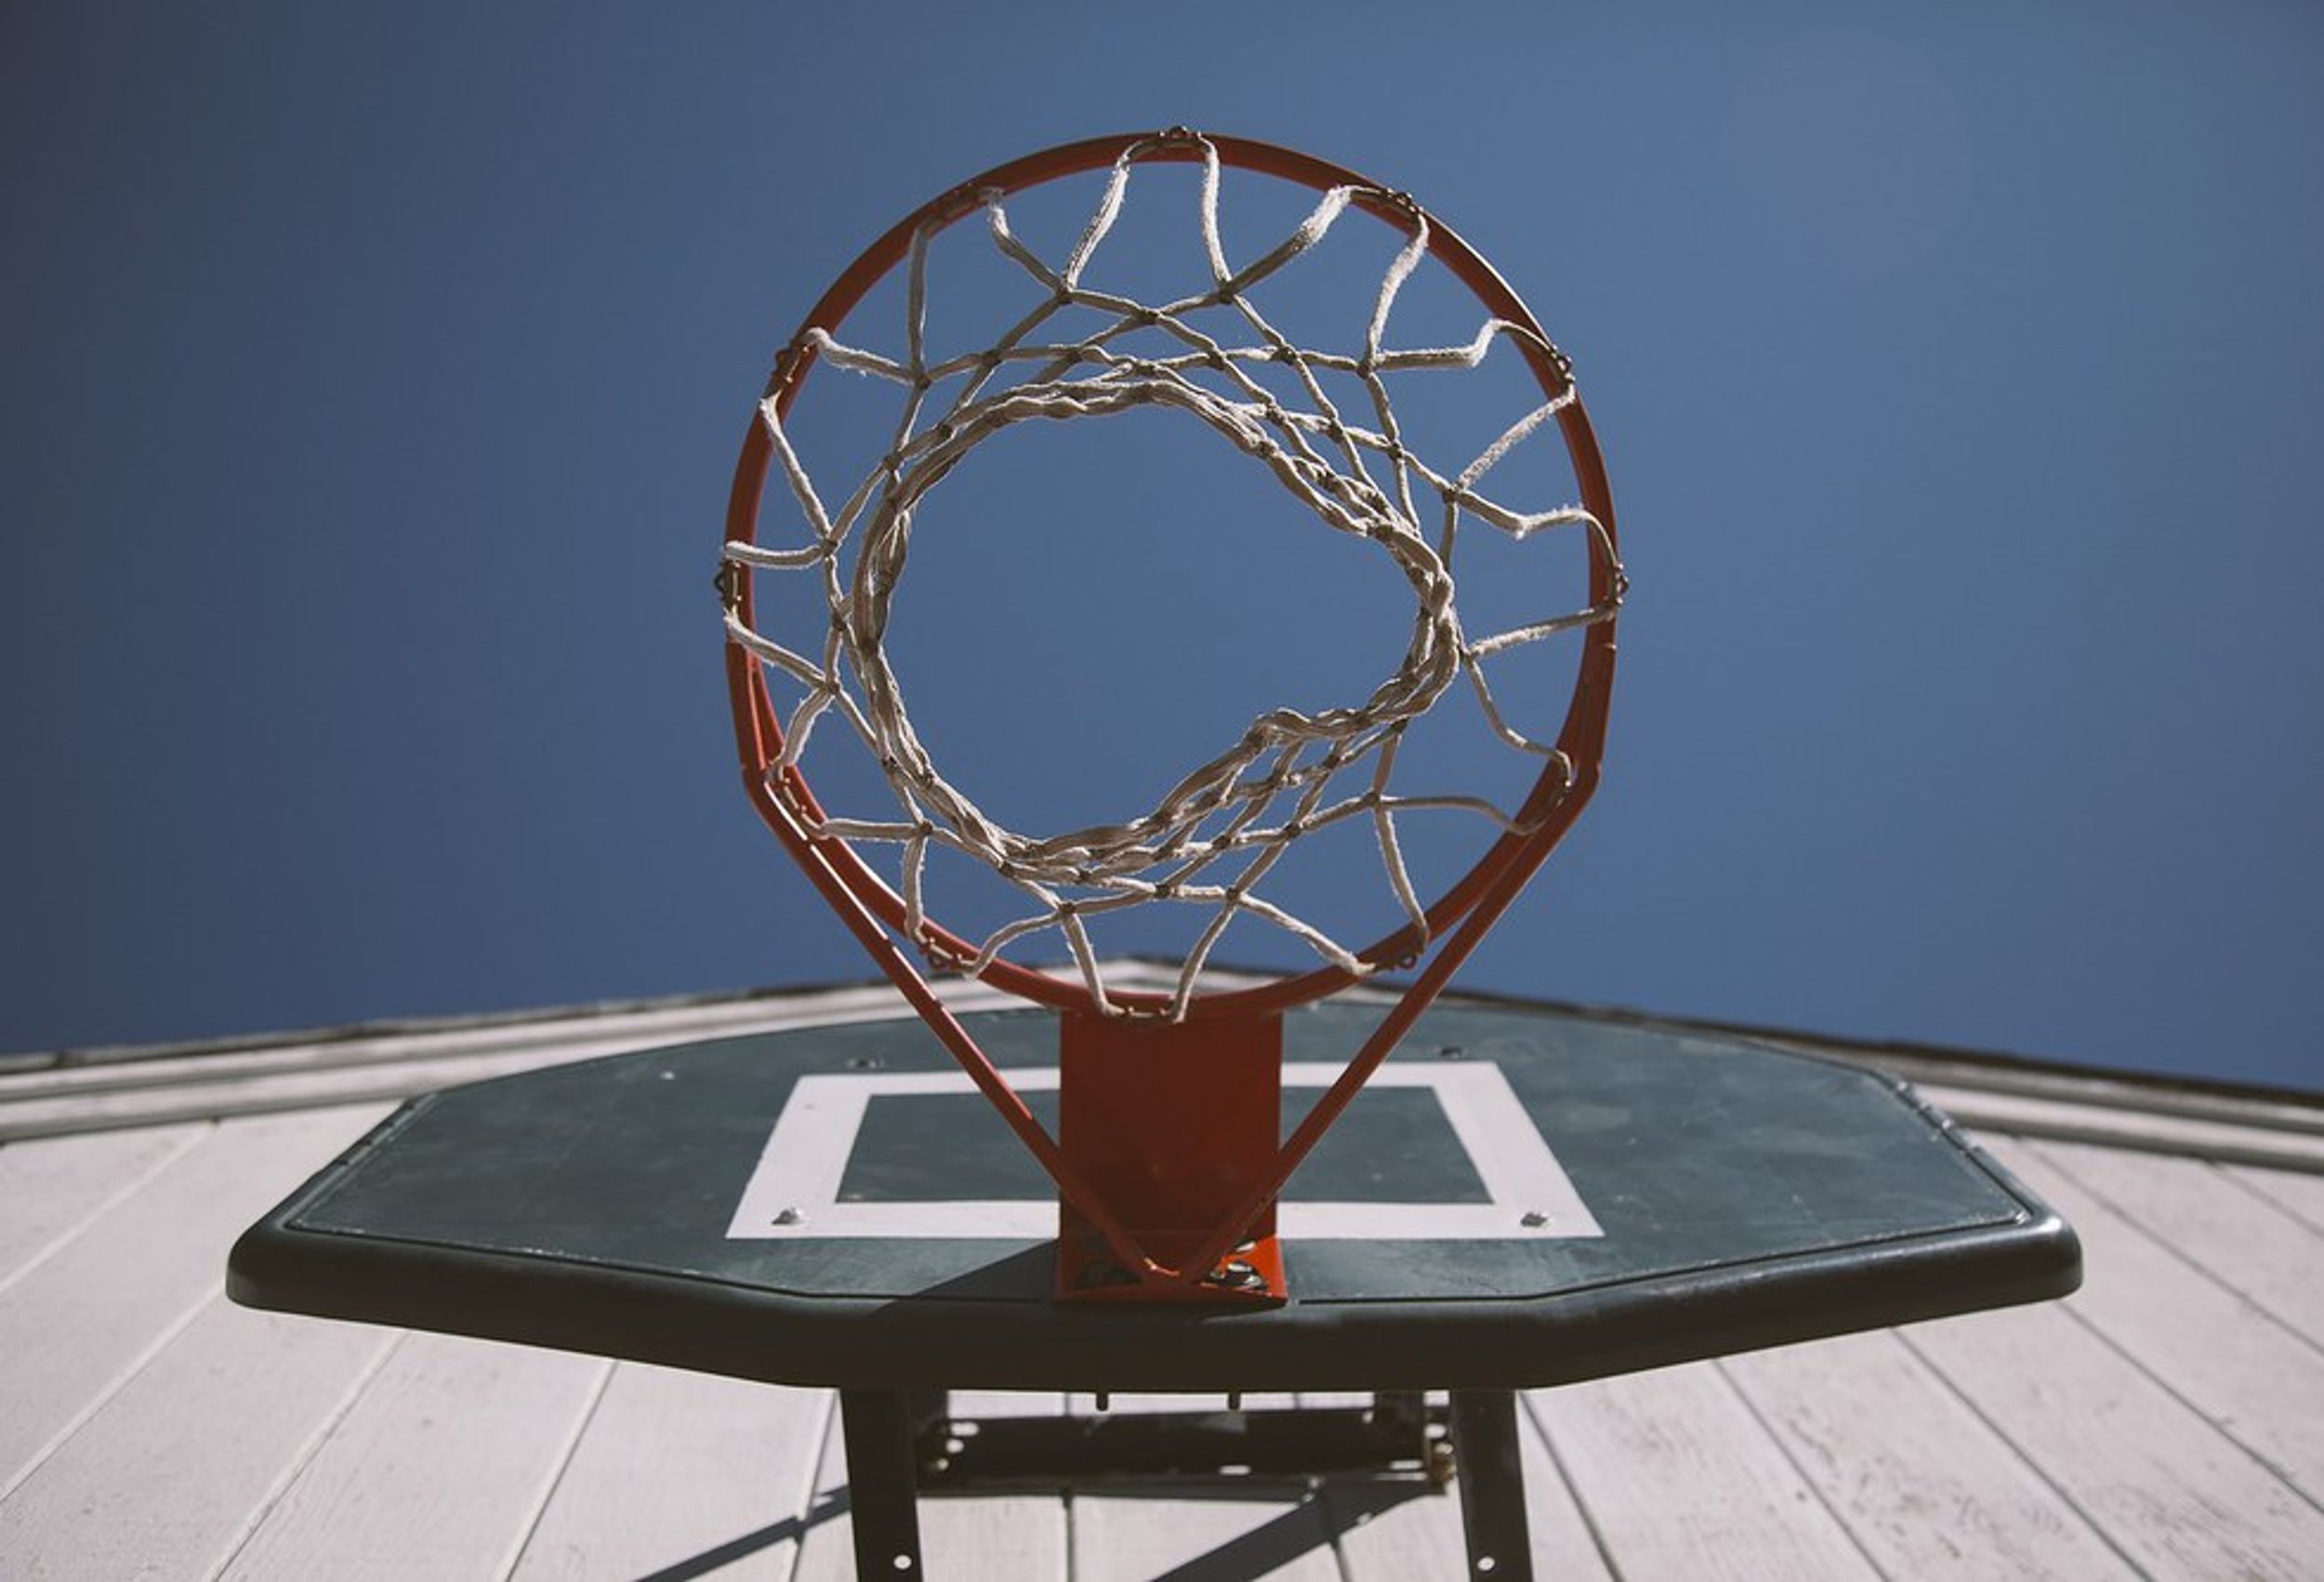 St. John's Coed Youth Basketball Team Forfeited Their Season To Remain Together